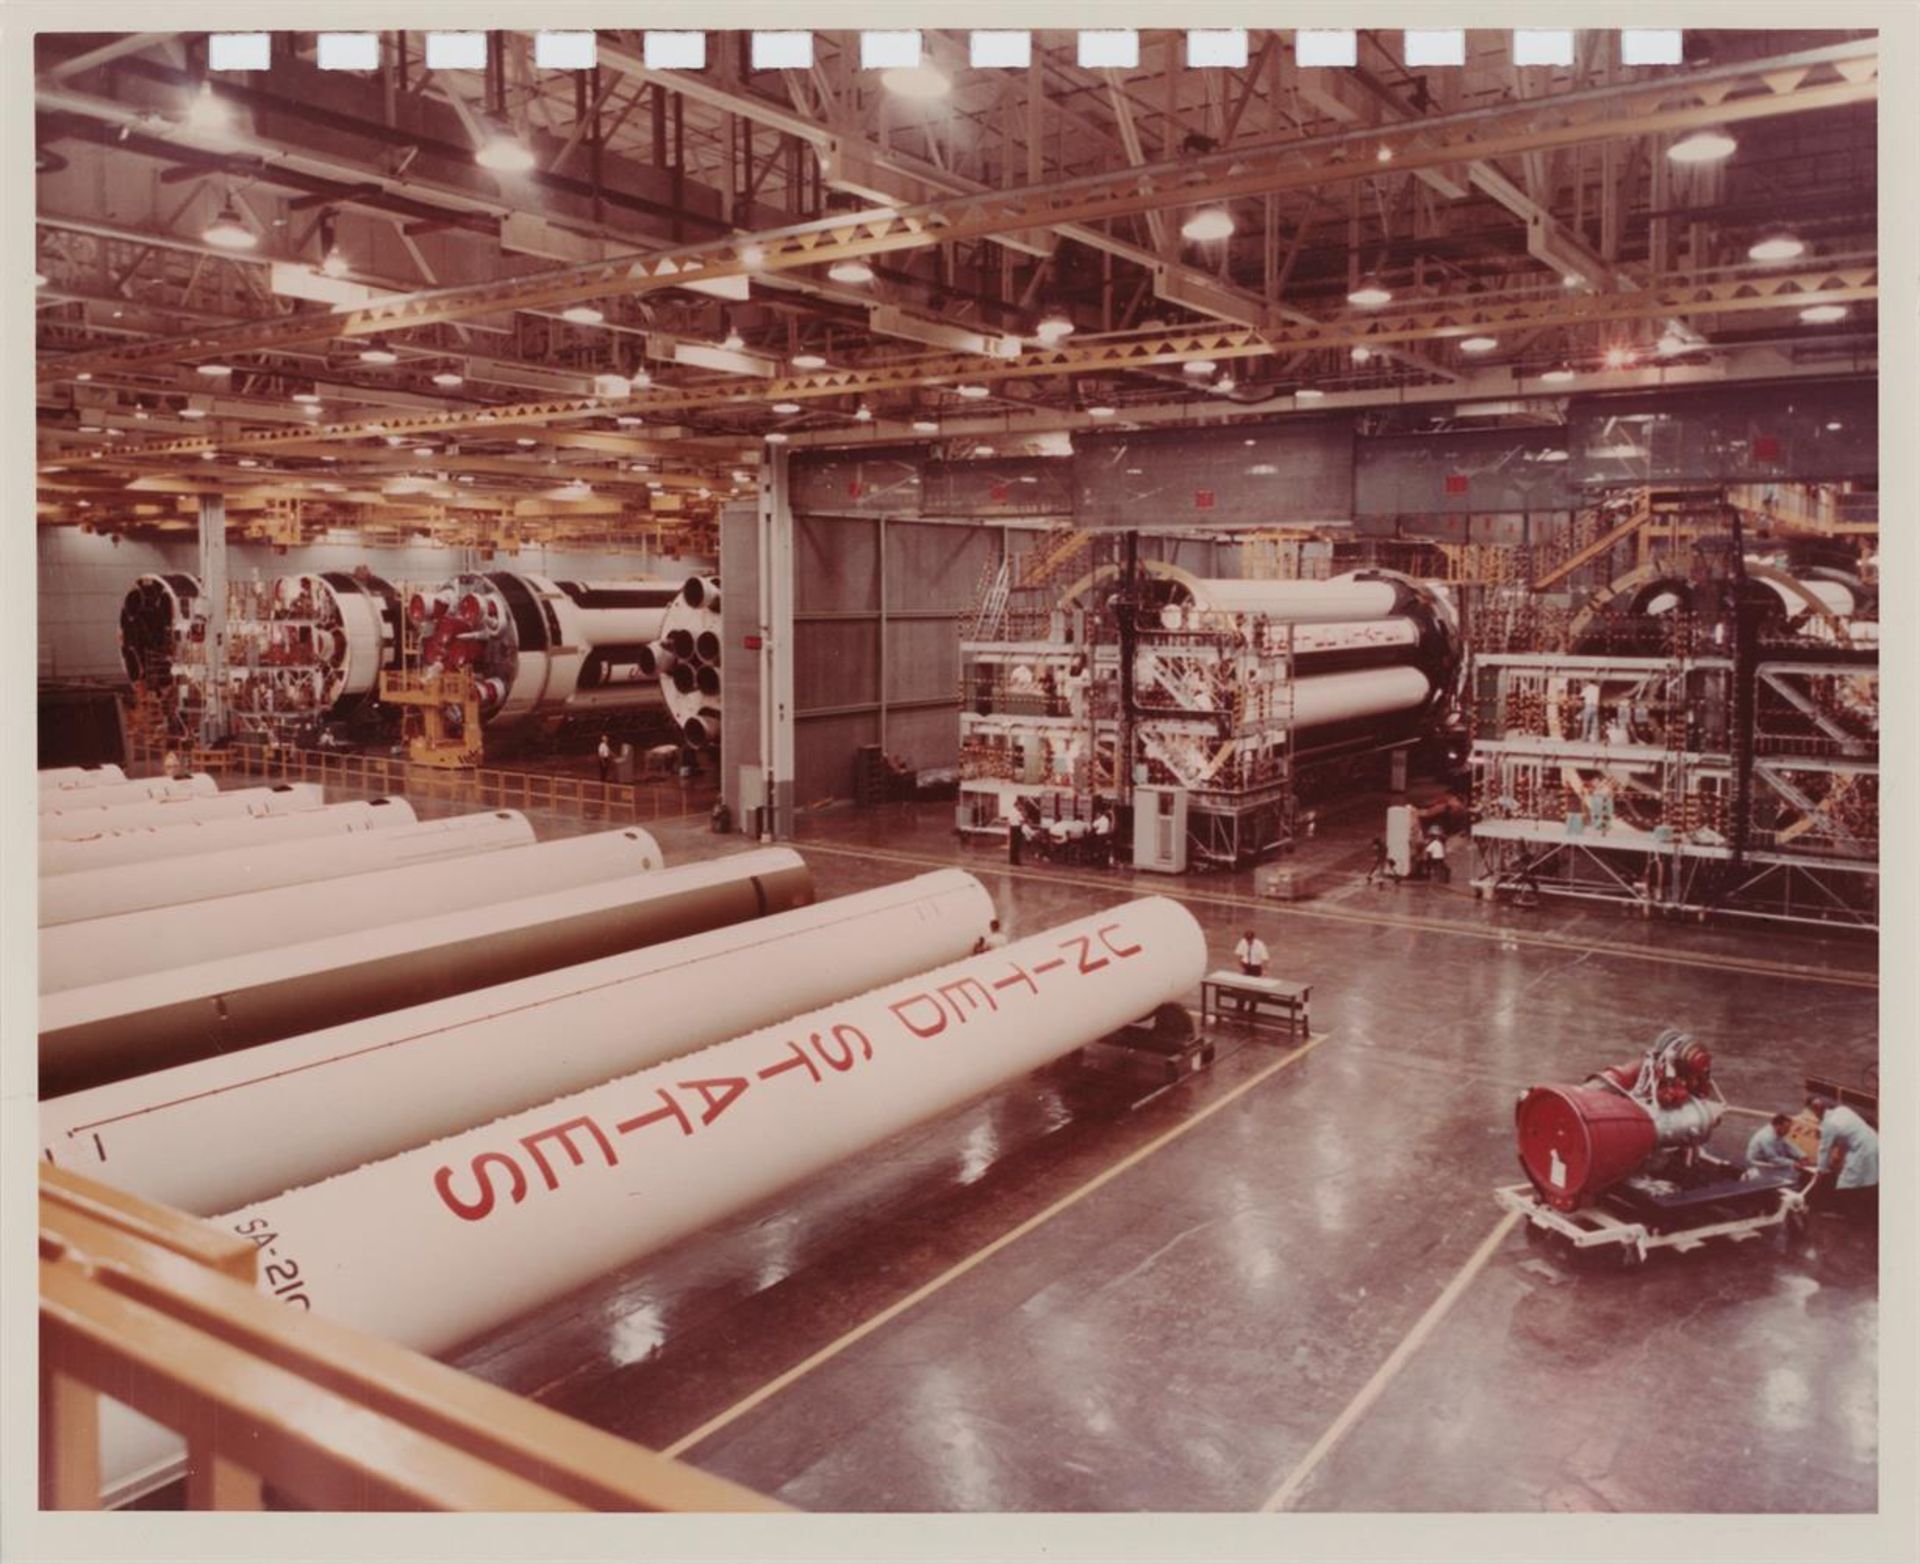 Manufacturing of the first Saturn V Moon rocket (4 photos), Project Apollo, 1965-1967 - Image 8 of 10